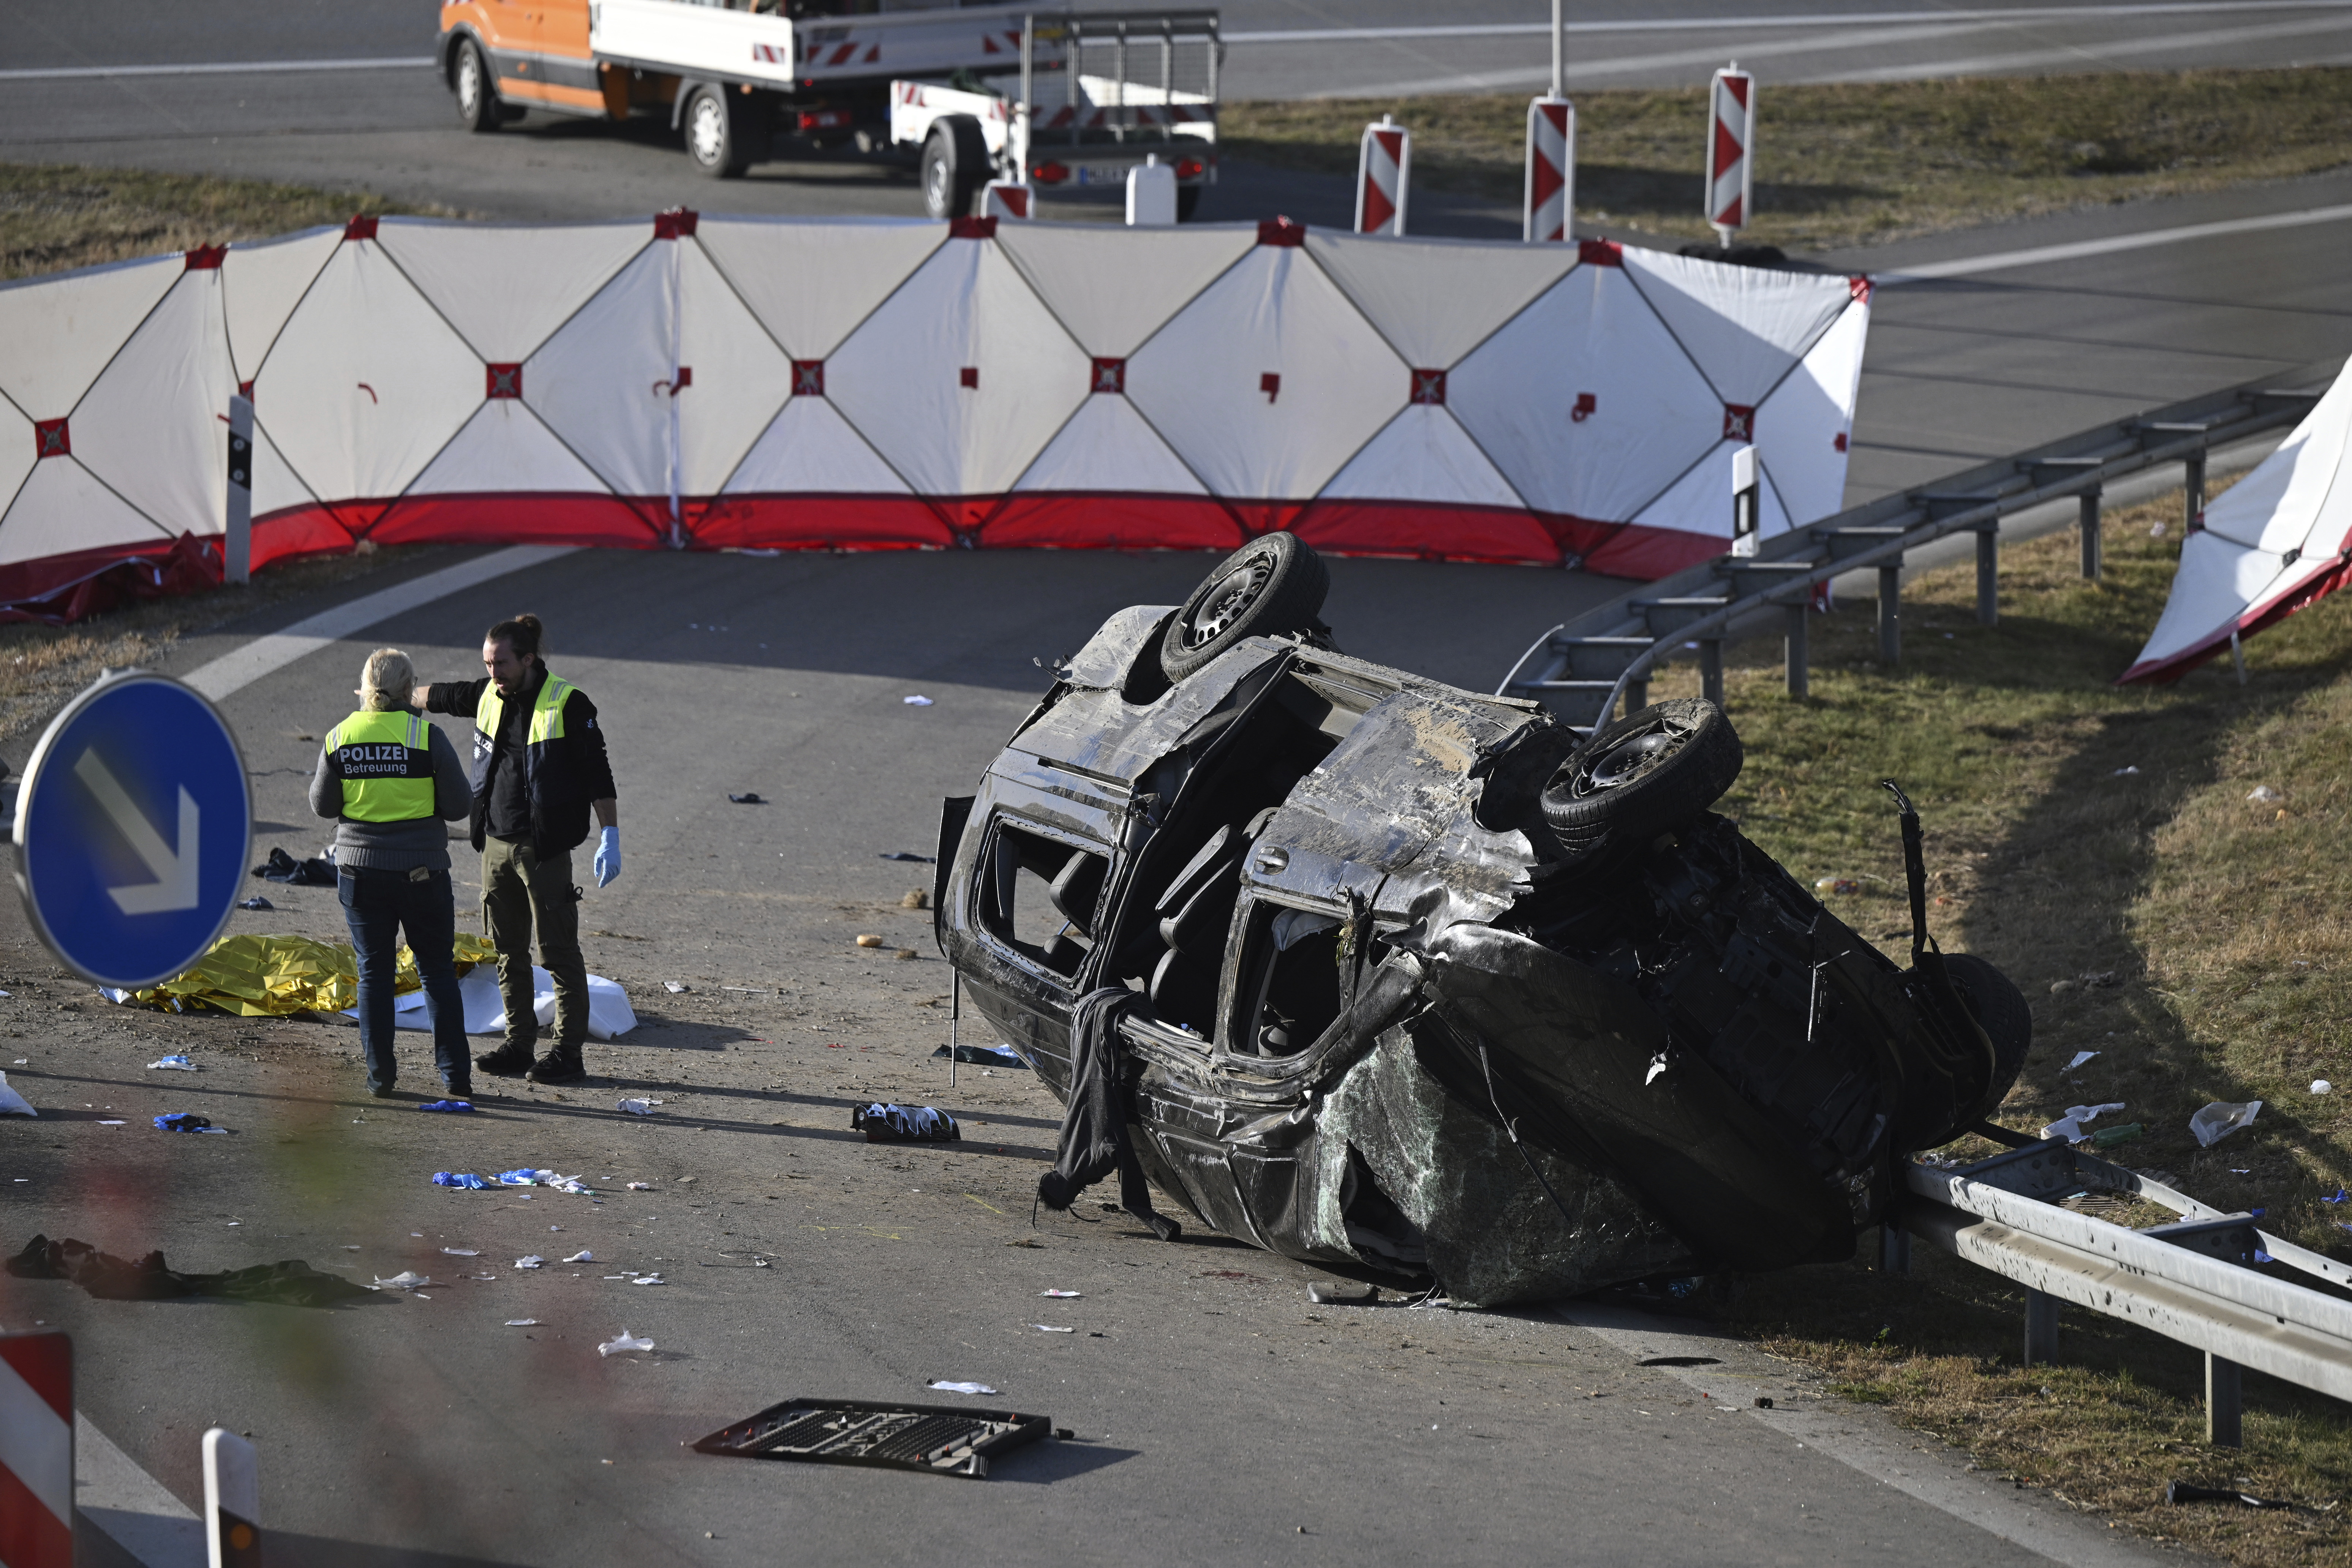 7 killed in head-on crash involving suspected migrant-smuggling